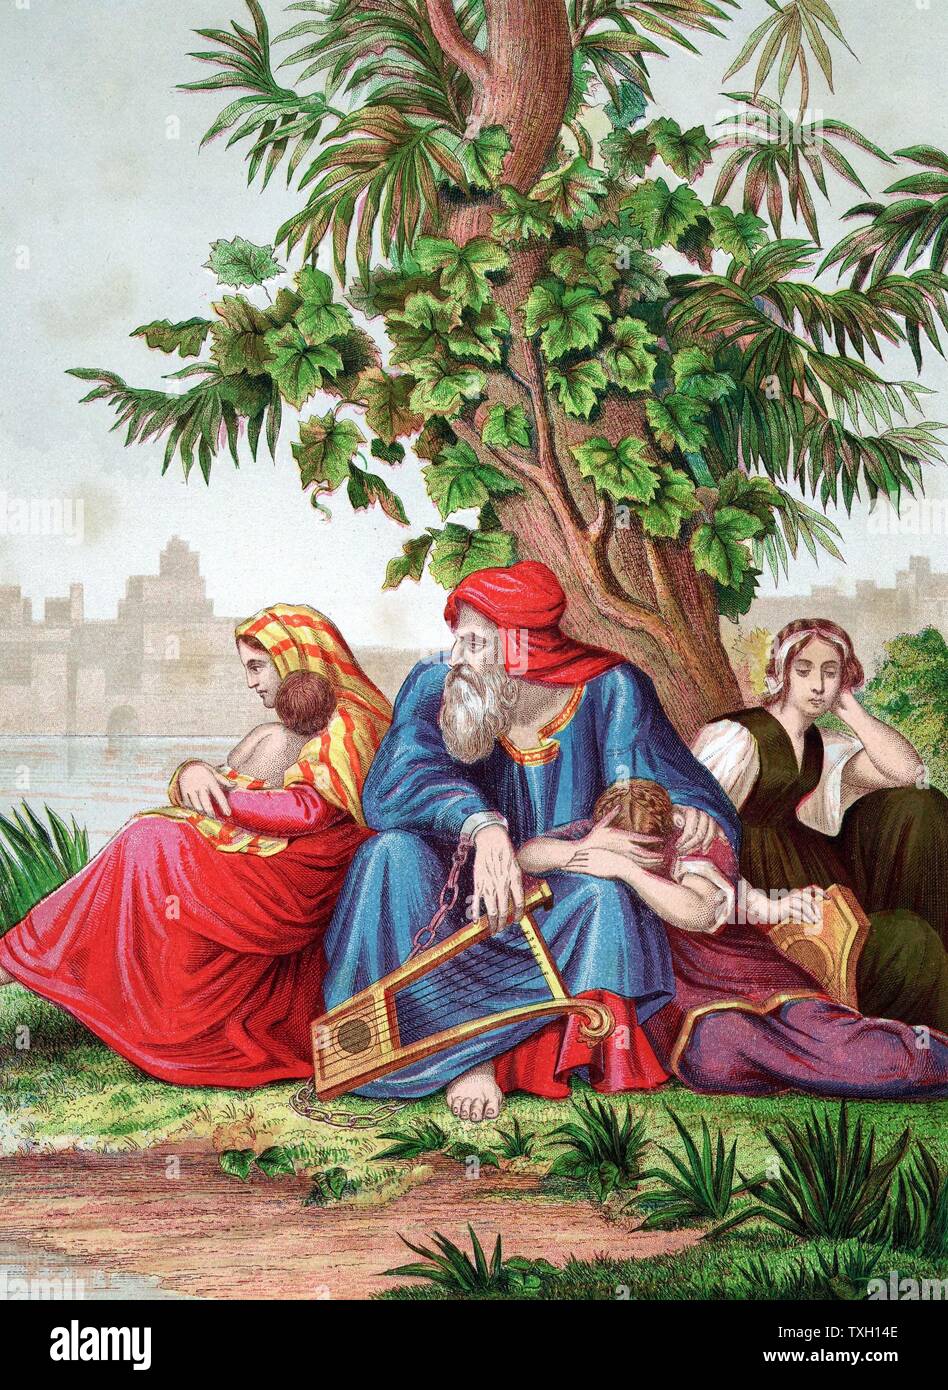 Constancy of the Jews in Babylonian captivity. 'By the rivers of Babylon, there we sat down, yea, we wept when we remembered Zion'. 'Bible': Psalm 137. Chromolithograph c1860. Jews made captive in Babylon by king Nebuchadnezzar (Nebuchadrezzar) 597 BC until released by Cyrus the Great c538 BC. Stock Photo